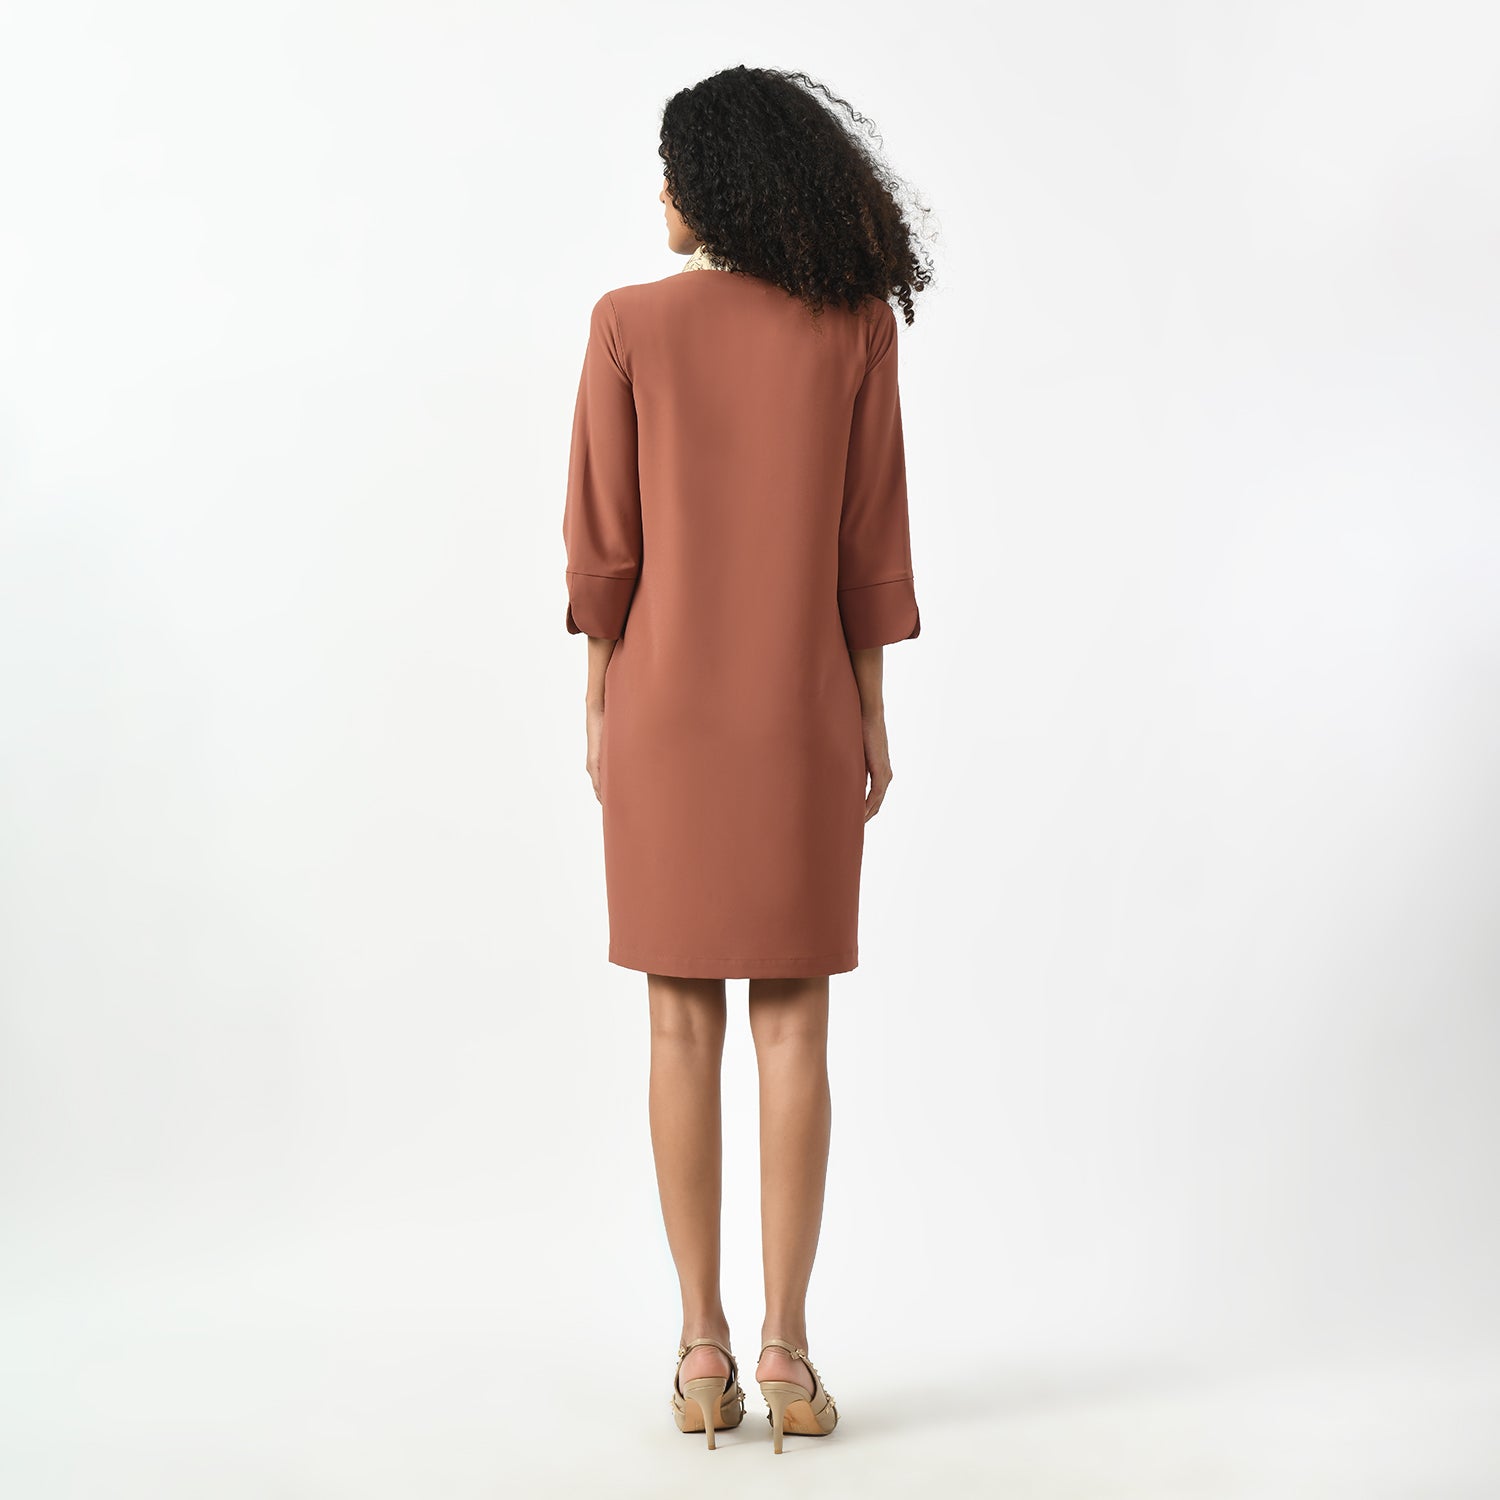 Peach Dress With Tie Knot Collar